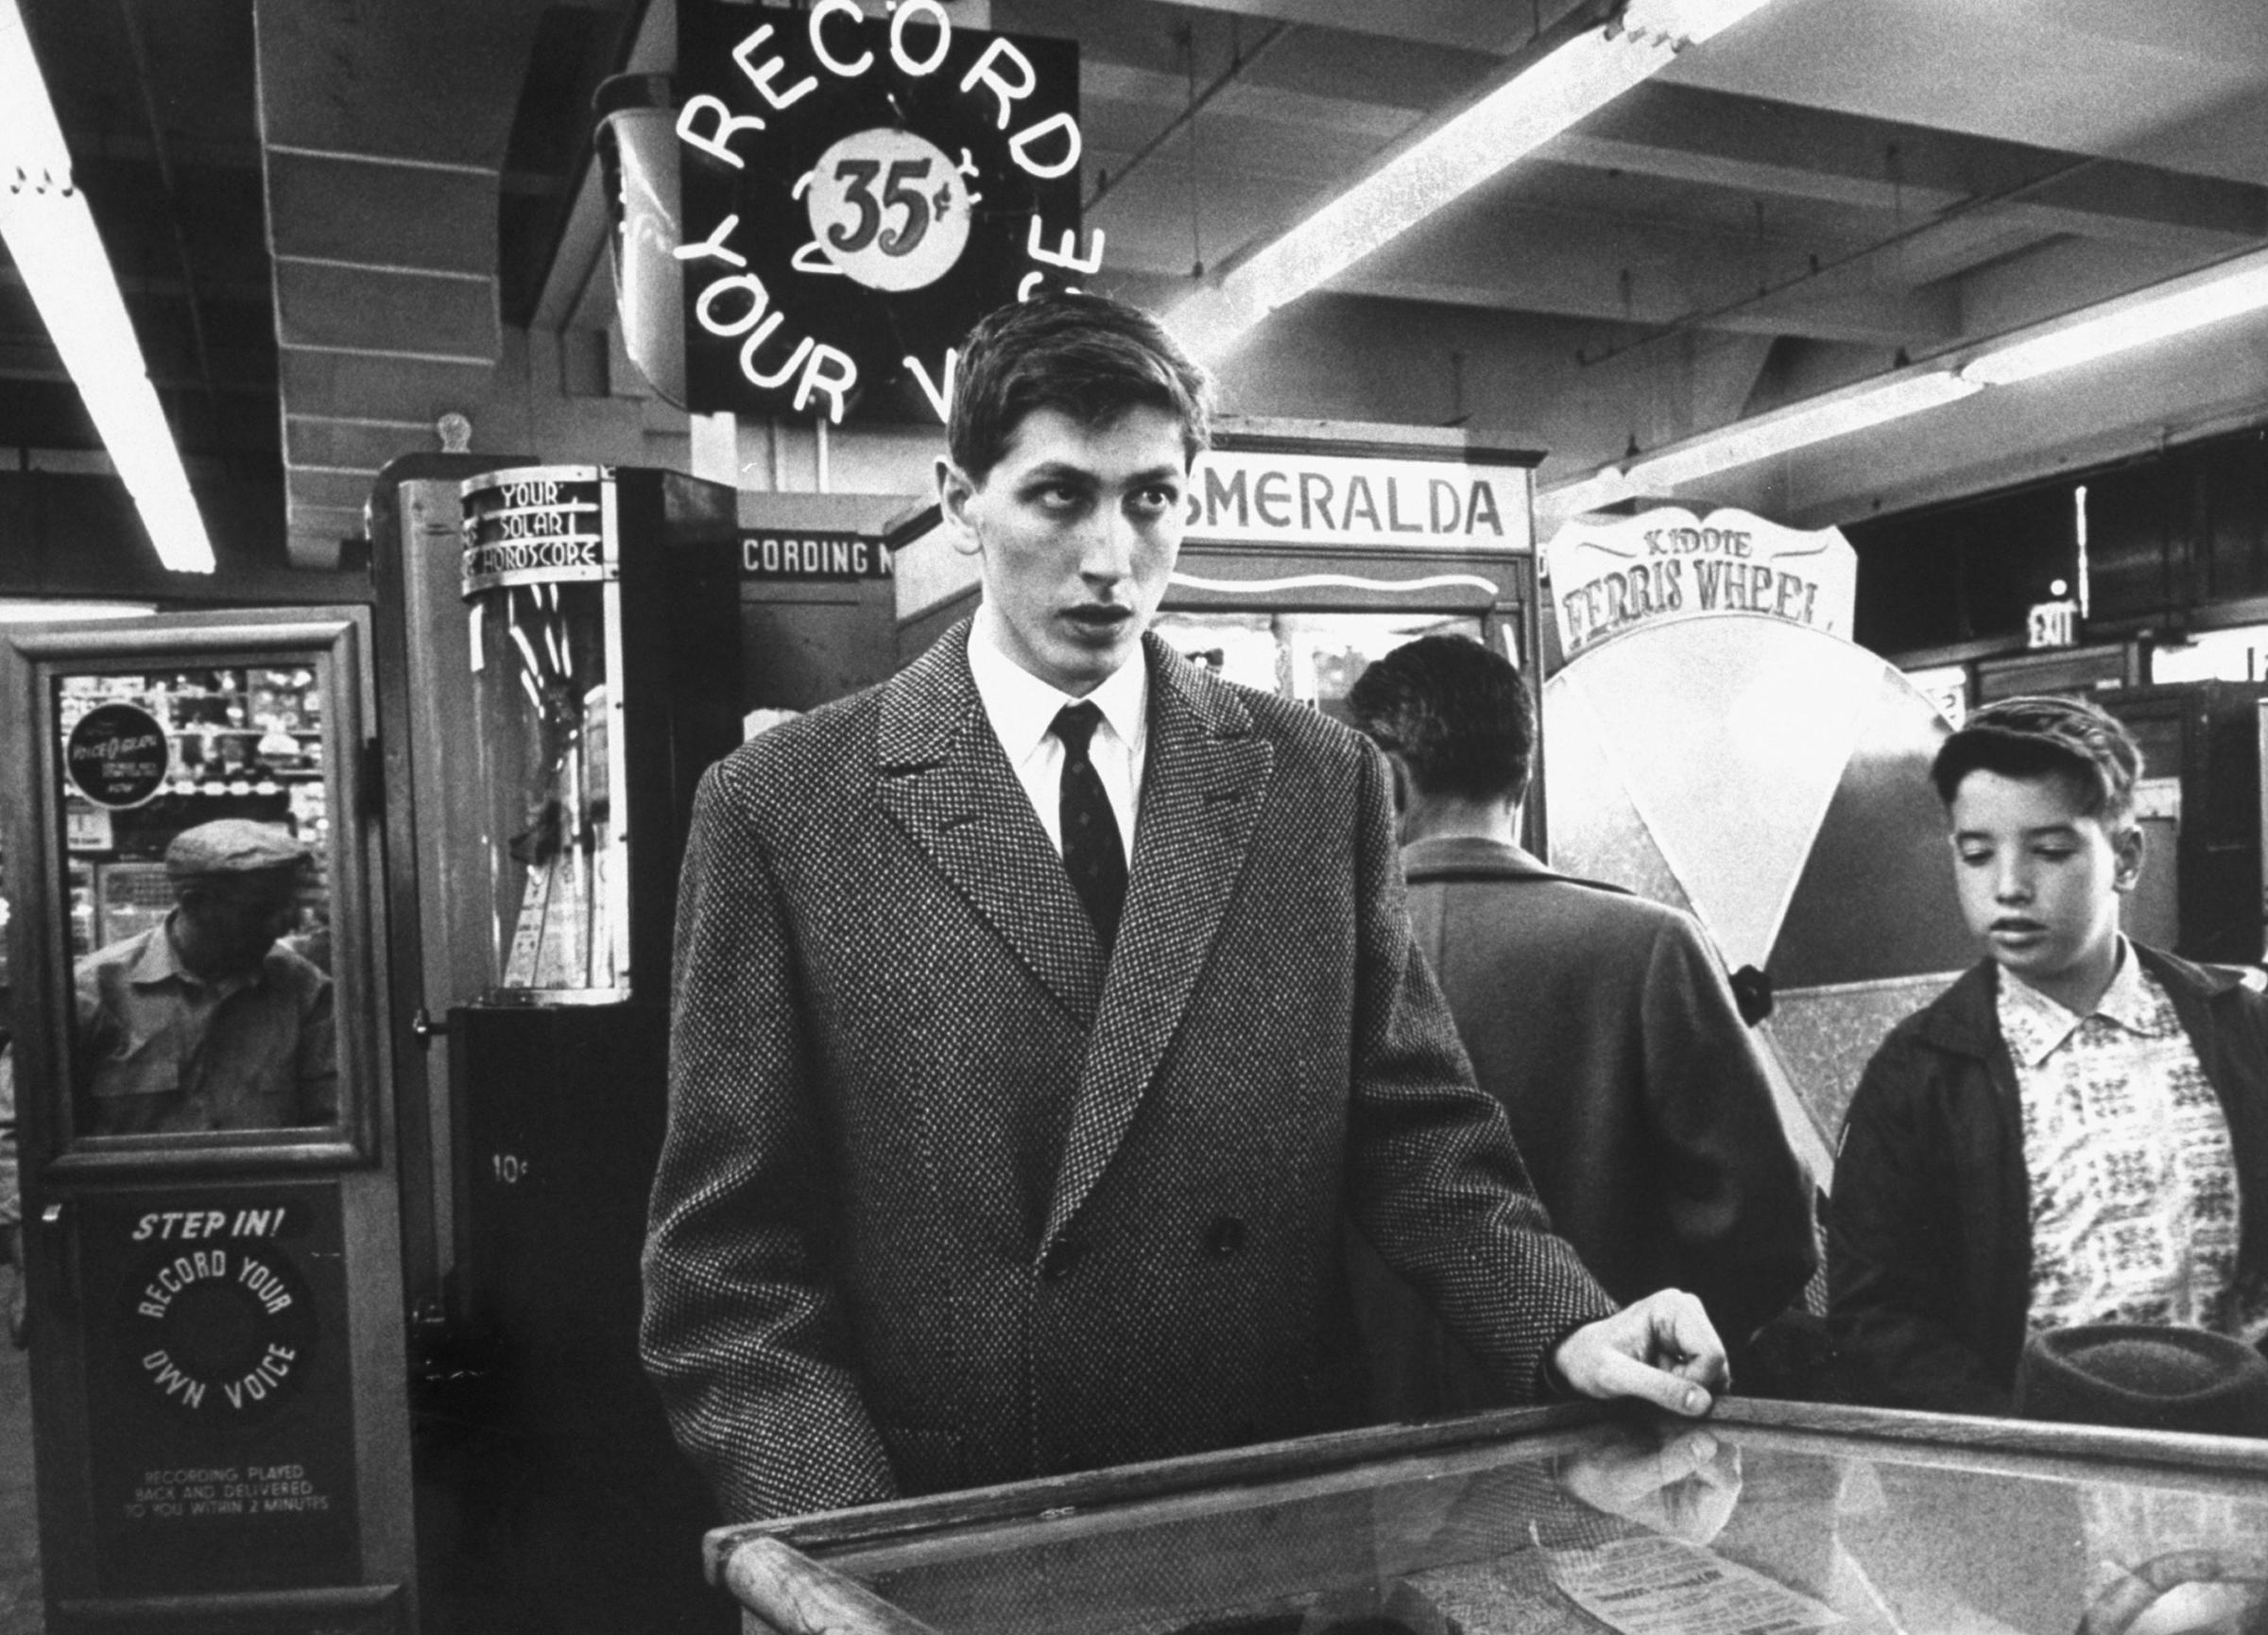 With chess problems spinning in his head by the millions, Bobby relaxes at a coin pinball machine.